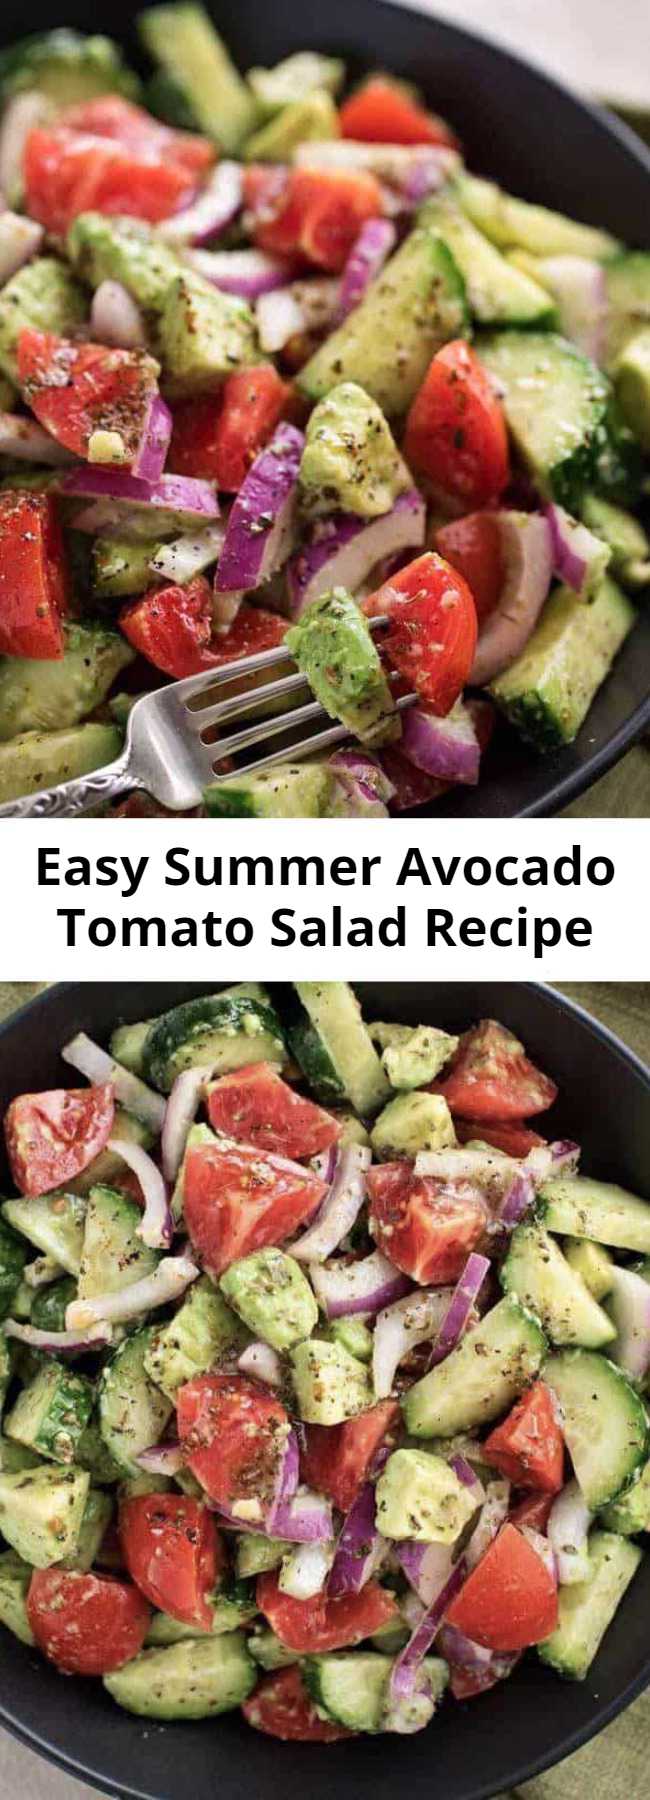 Easy Summer Avocado Tomato Salad Recipe - This fresh and delicious Avocado Tomato salad recipe is made with cucumbers, tomatoes, and avocados mixed in with a unique and flavorful dressing. So refreshing, perfect for the summer and pairs well with any meal as a side dish or enjoy on its own!